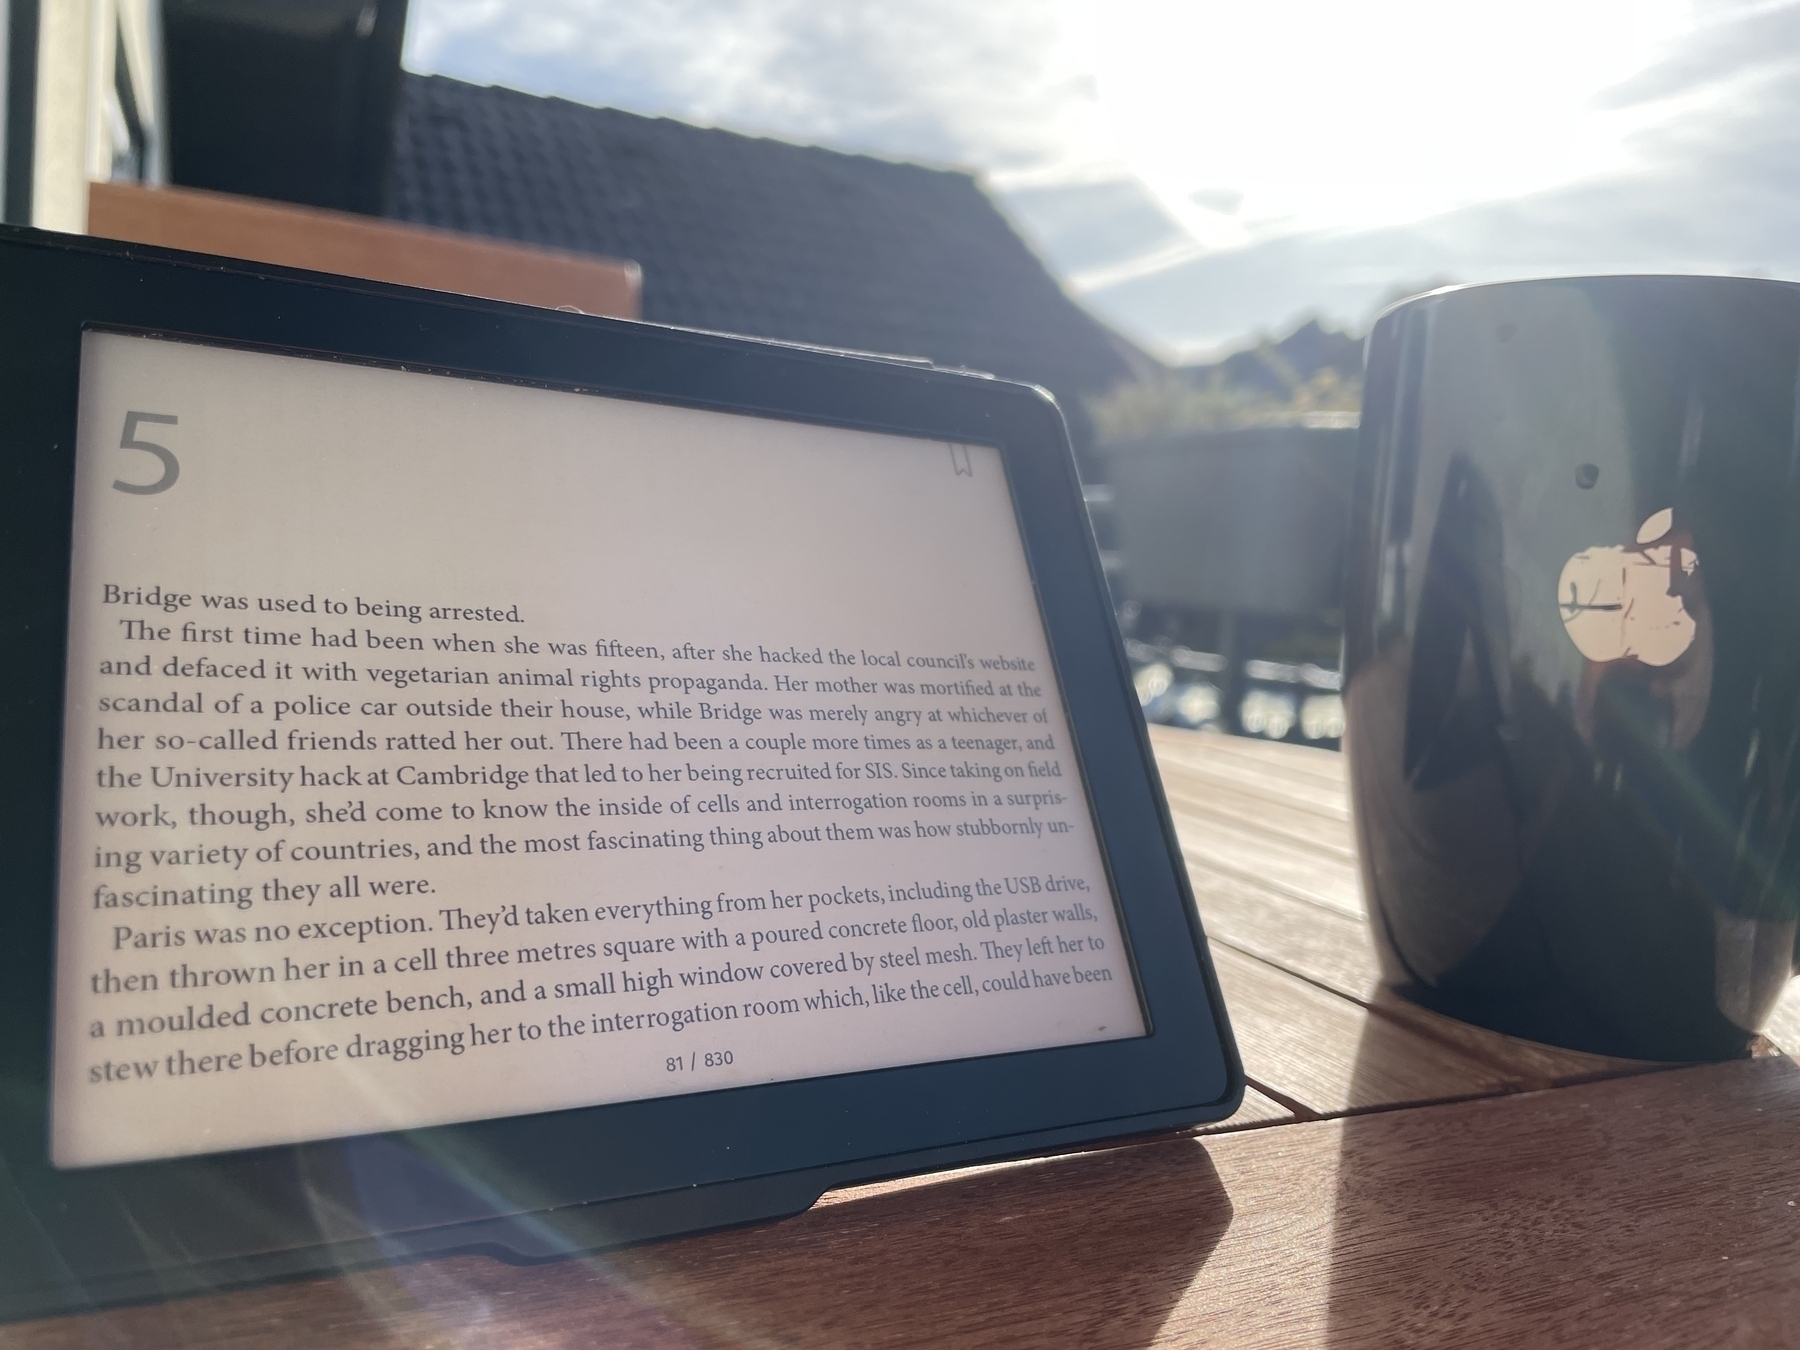 Tolino ebook reader in landscape, standing upright next to a coffee mug with a scratched up Apple logo. The ebook shows the beginning of Chapter 5. 